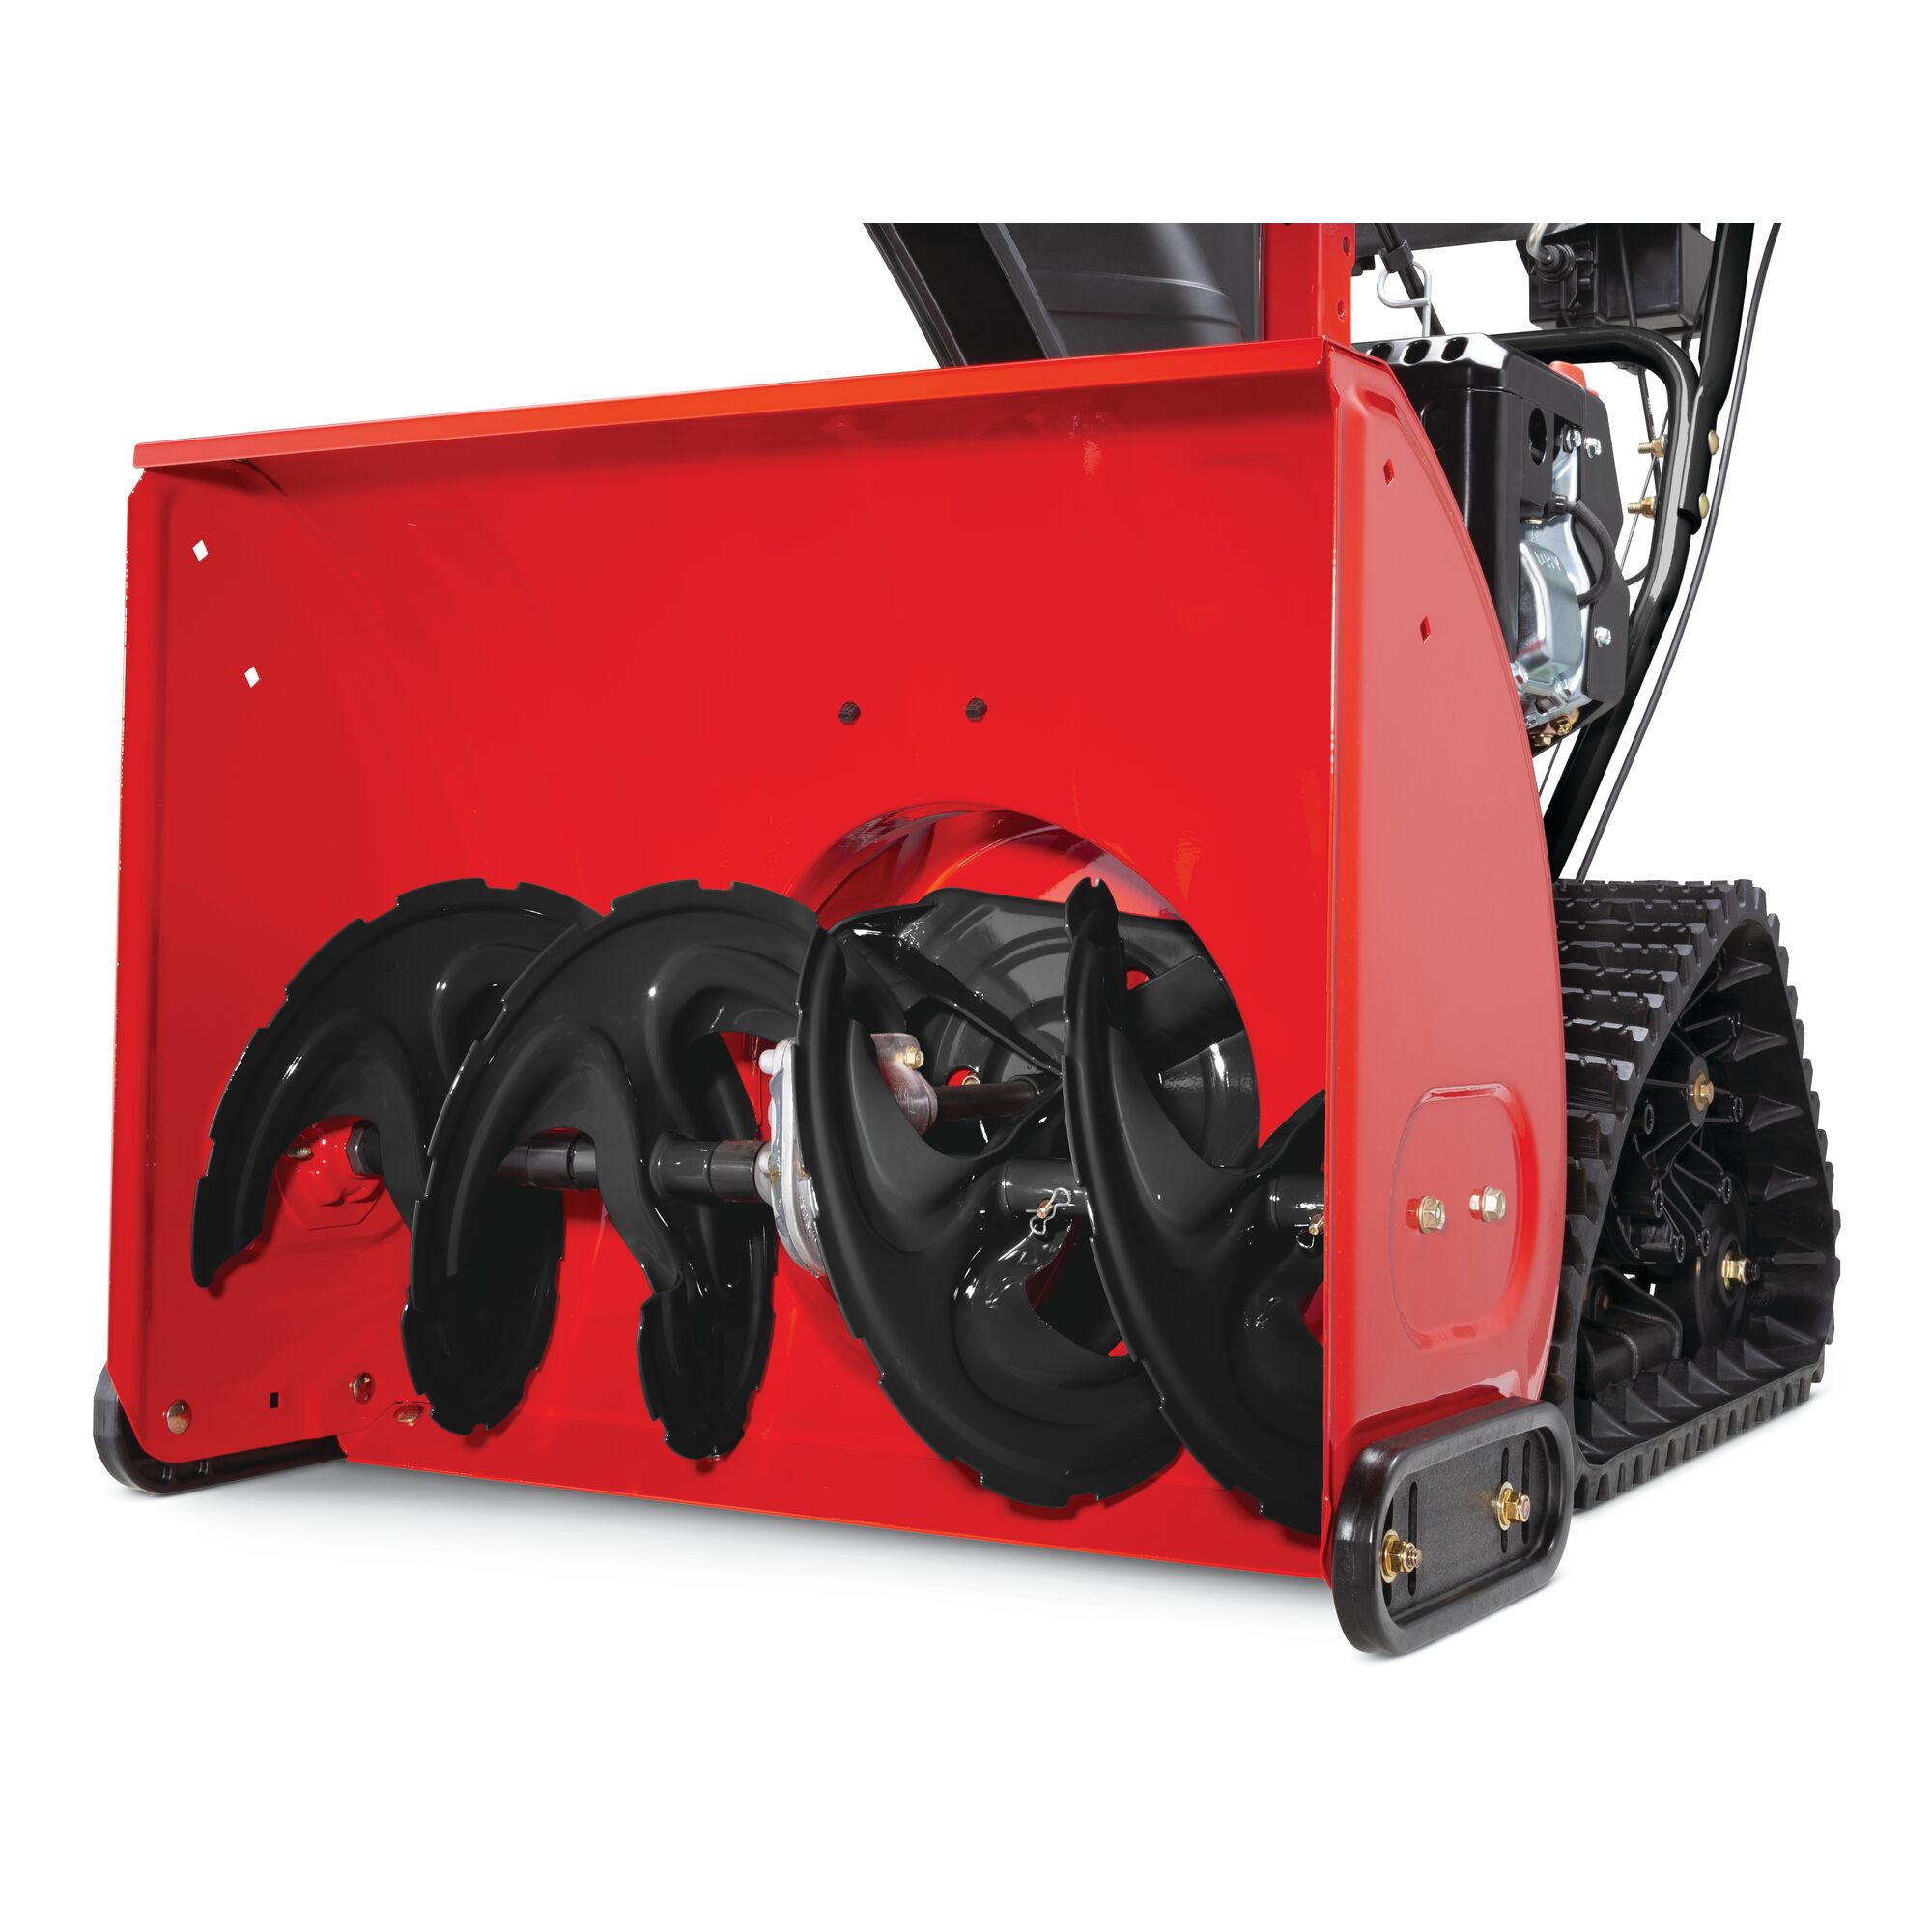 Enhanced clearing power feature in 26 inch 208 CC electric start track drive snow blower.